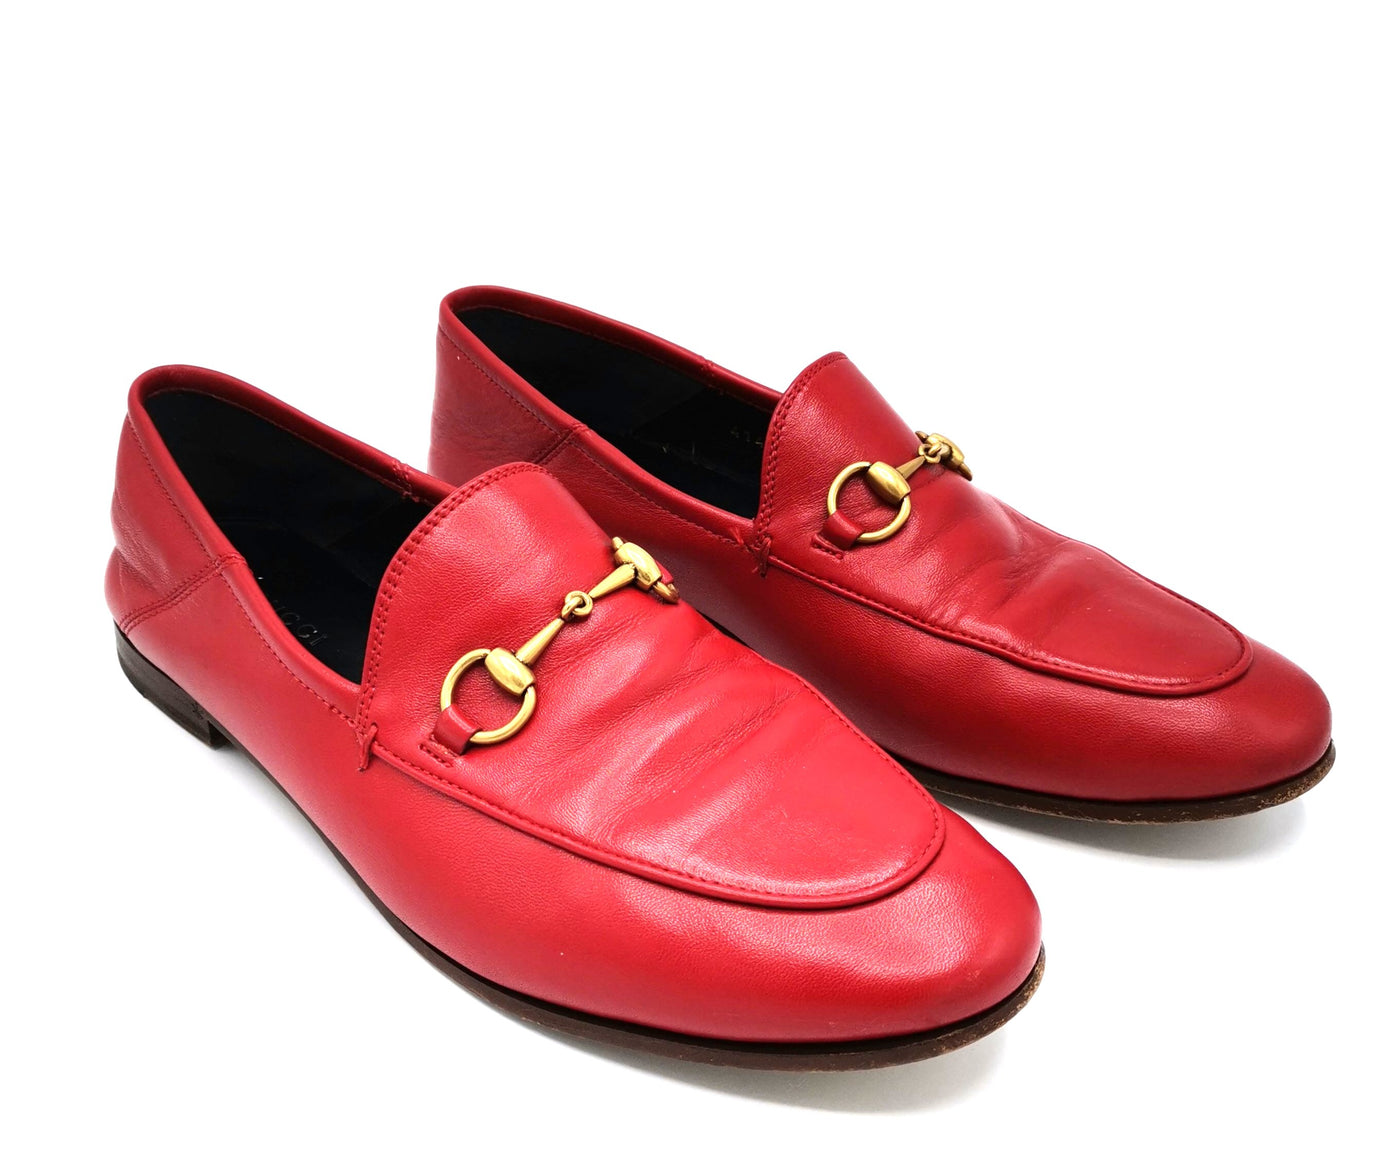 Gucci Horsebit red loafers size 38.5 with box RRP £595